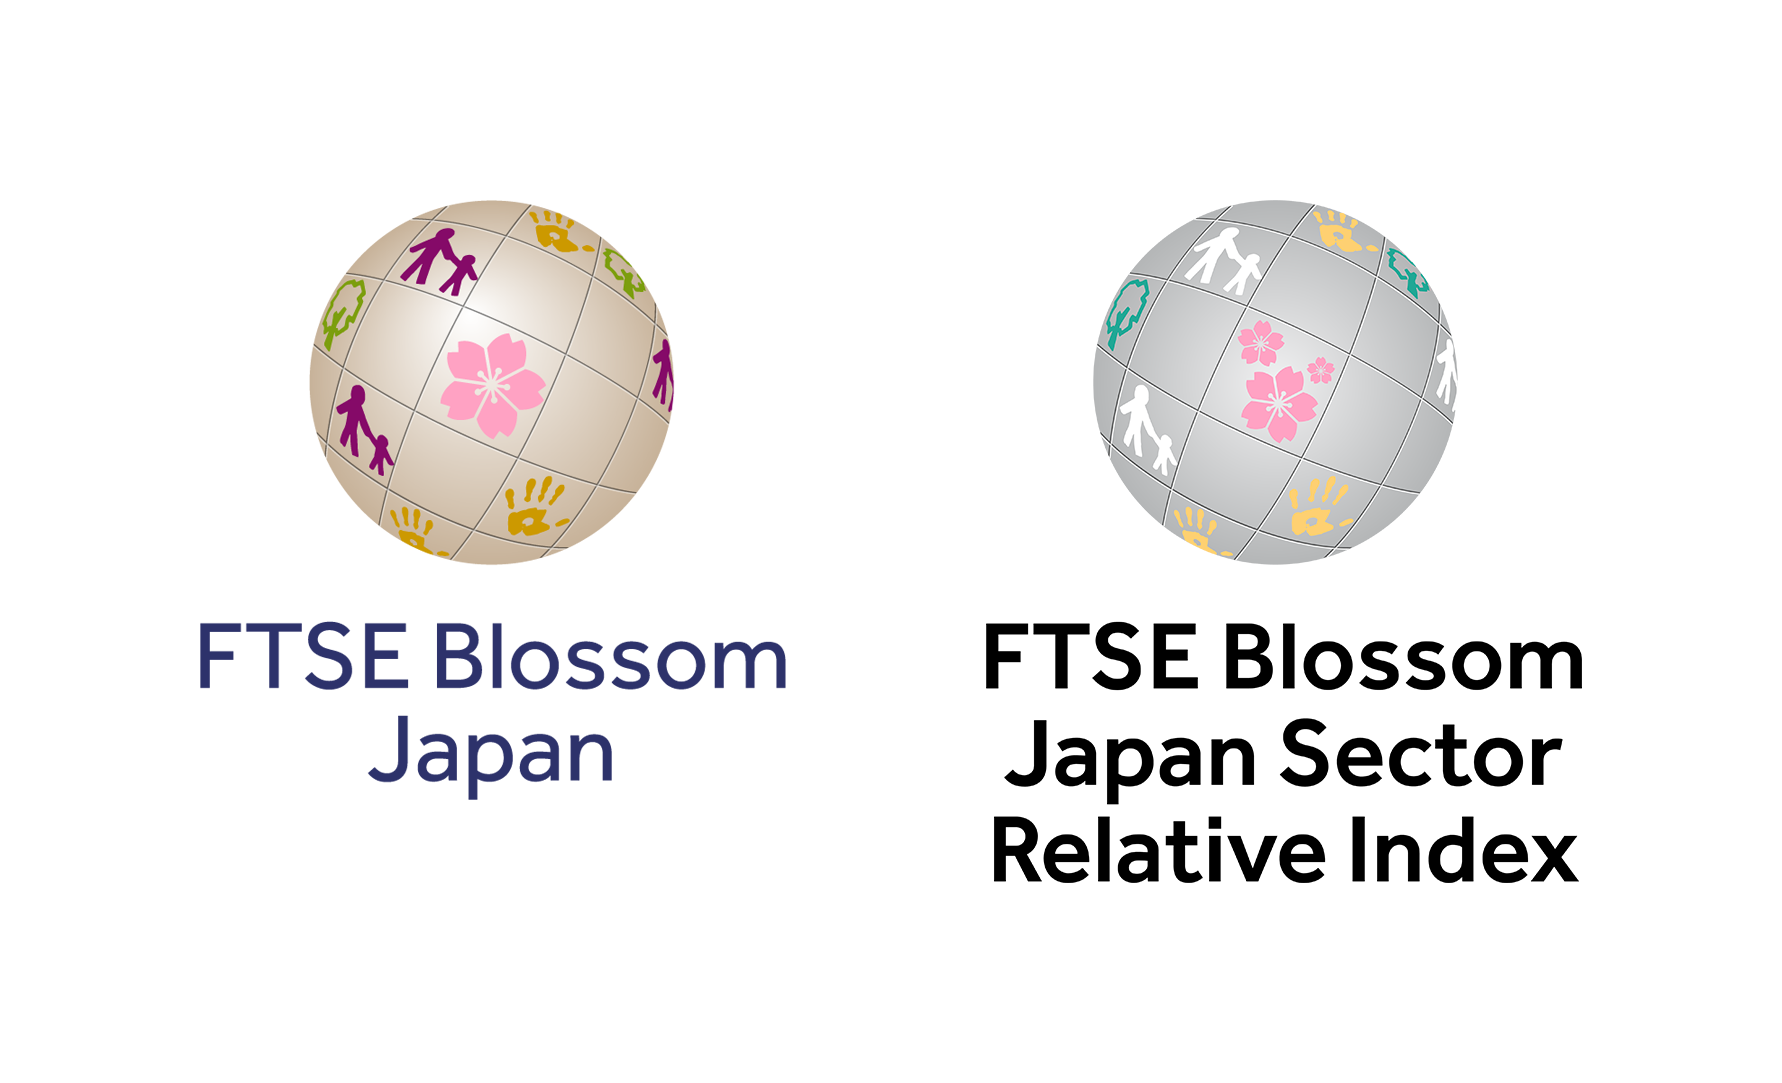 the FTSE Blossom Japan Index and the FTSE Blossom Japan Sector Relative Index Logos